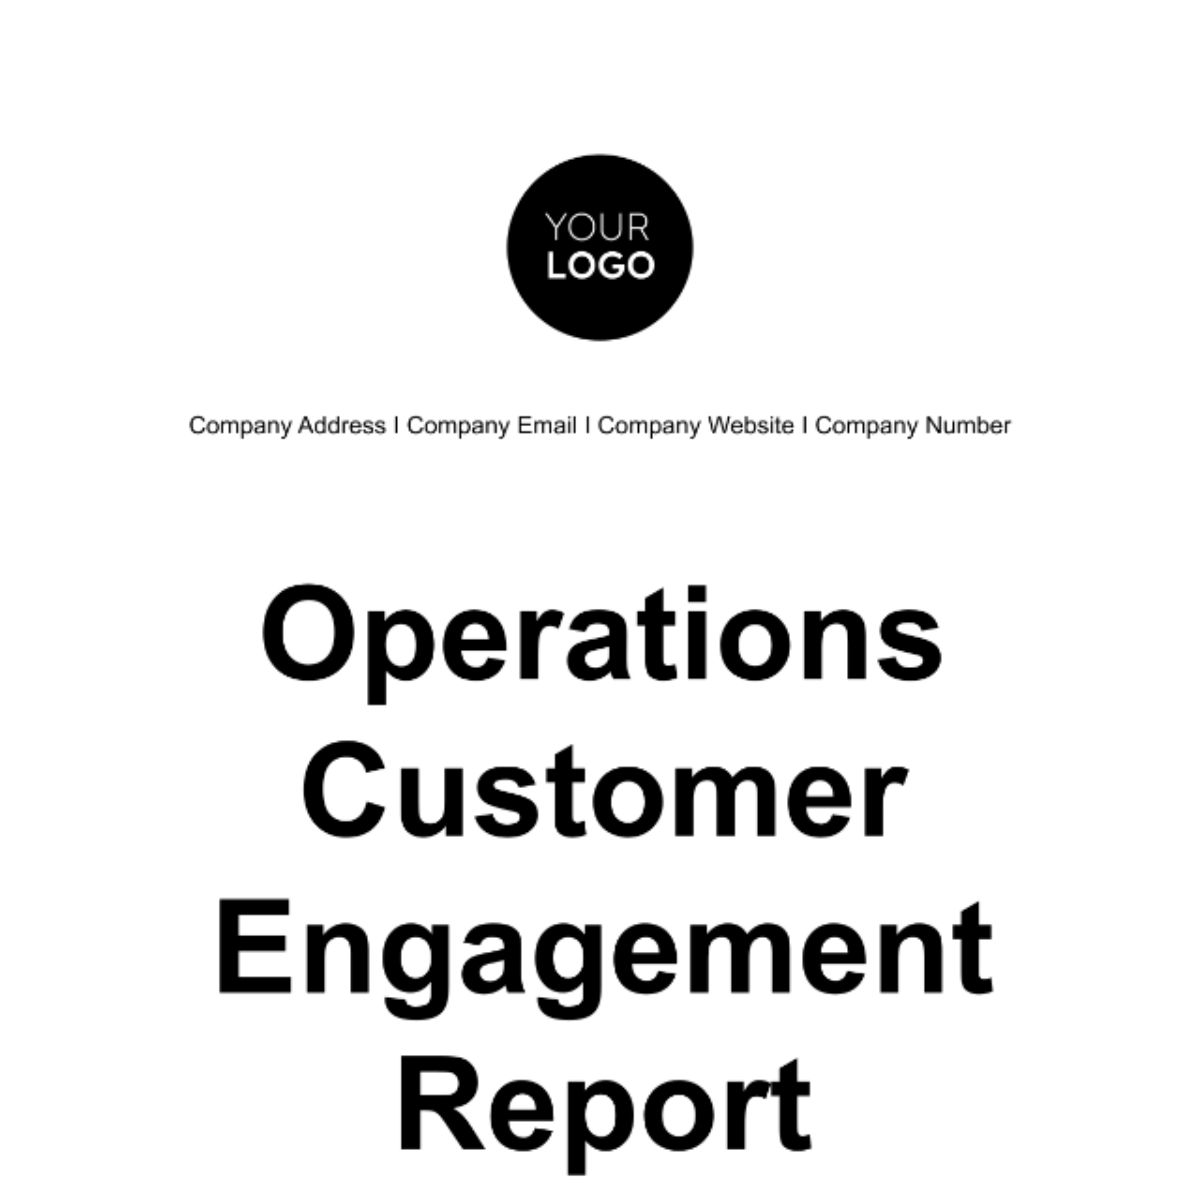 Operations Customer Engagement Report Template